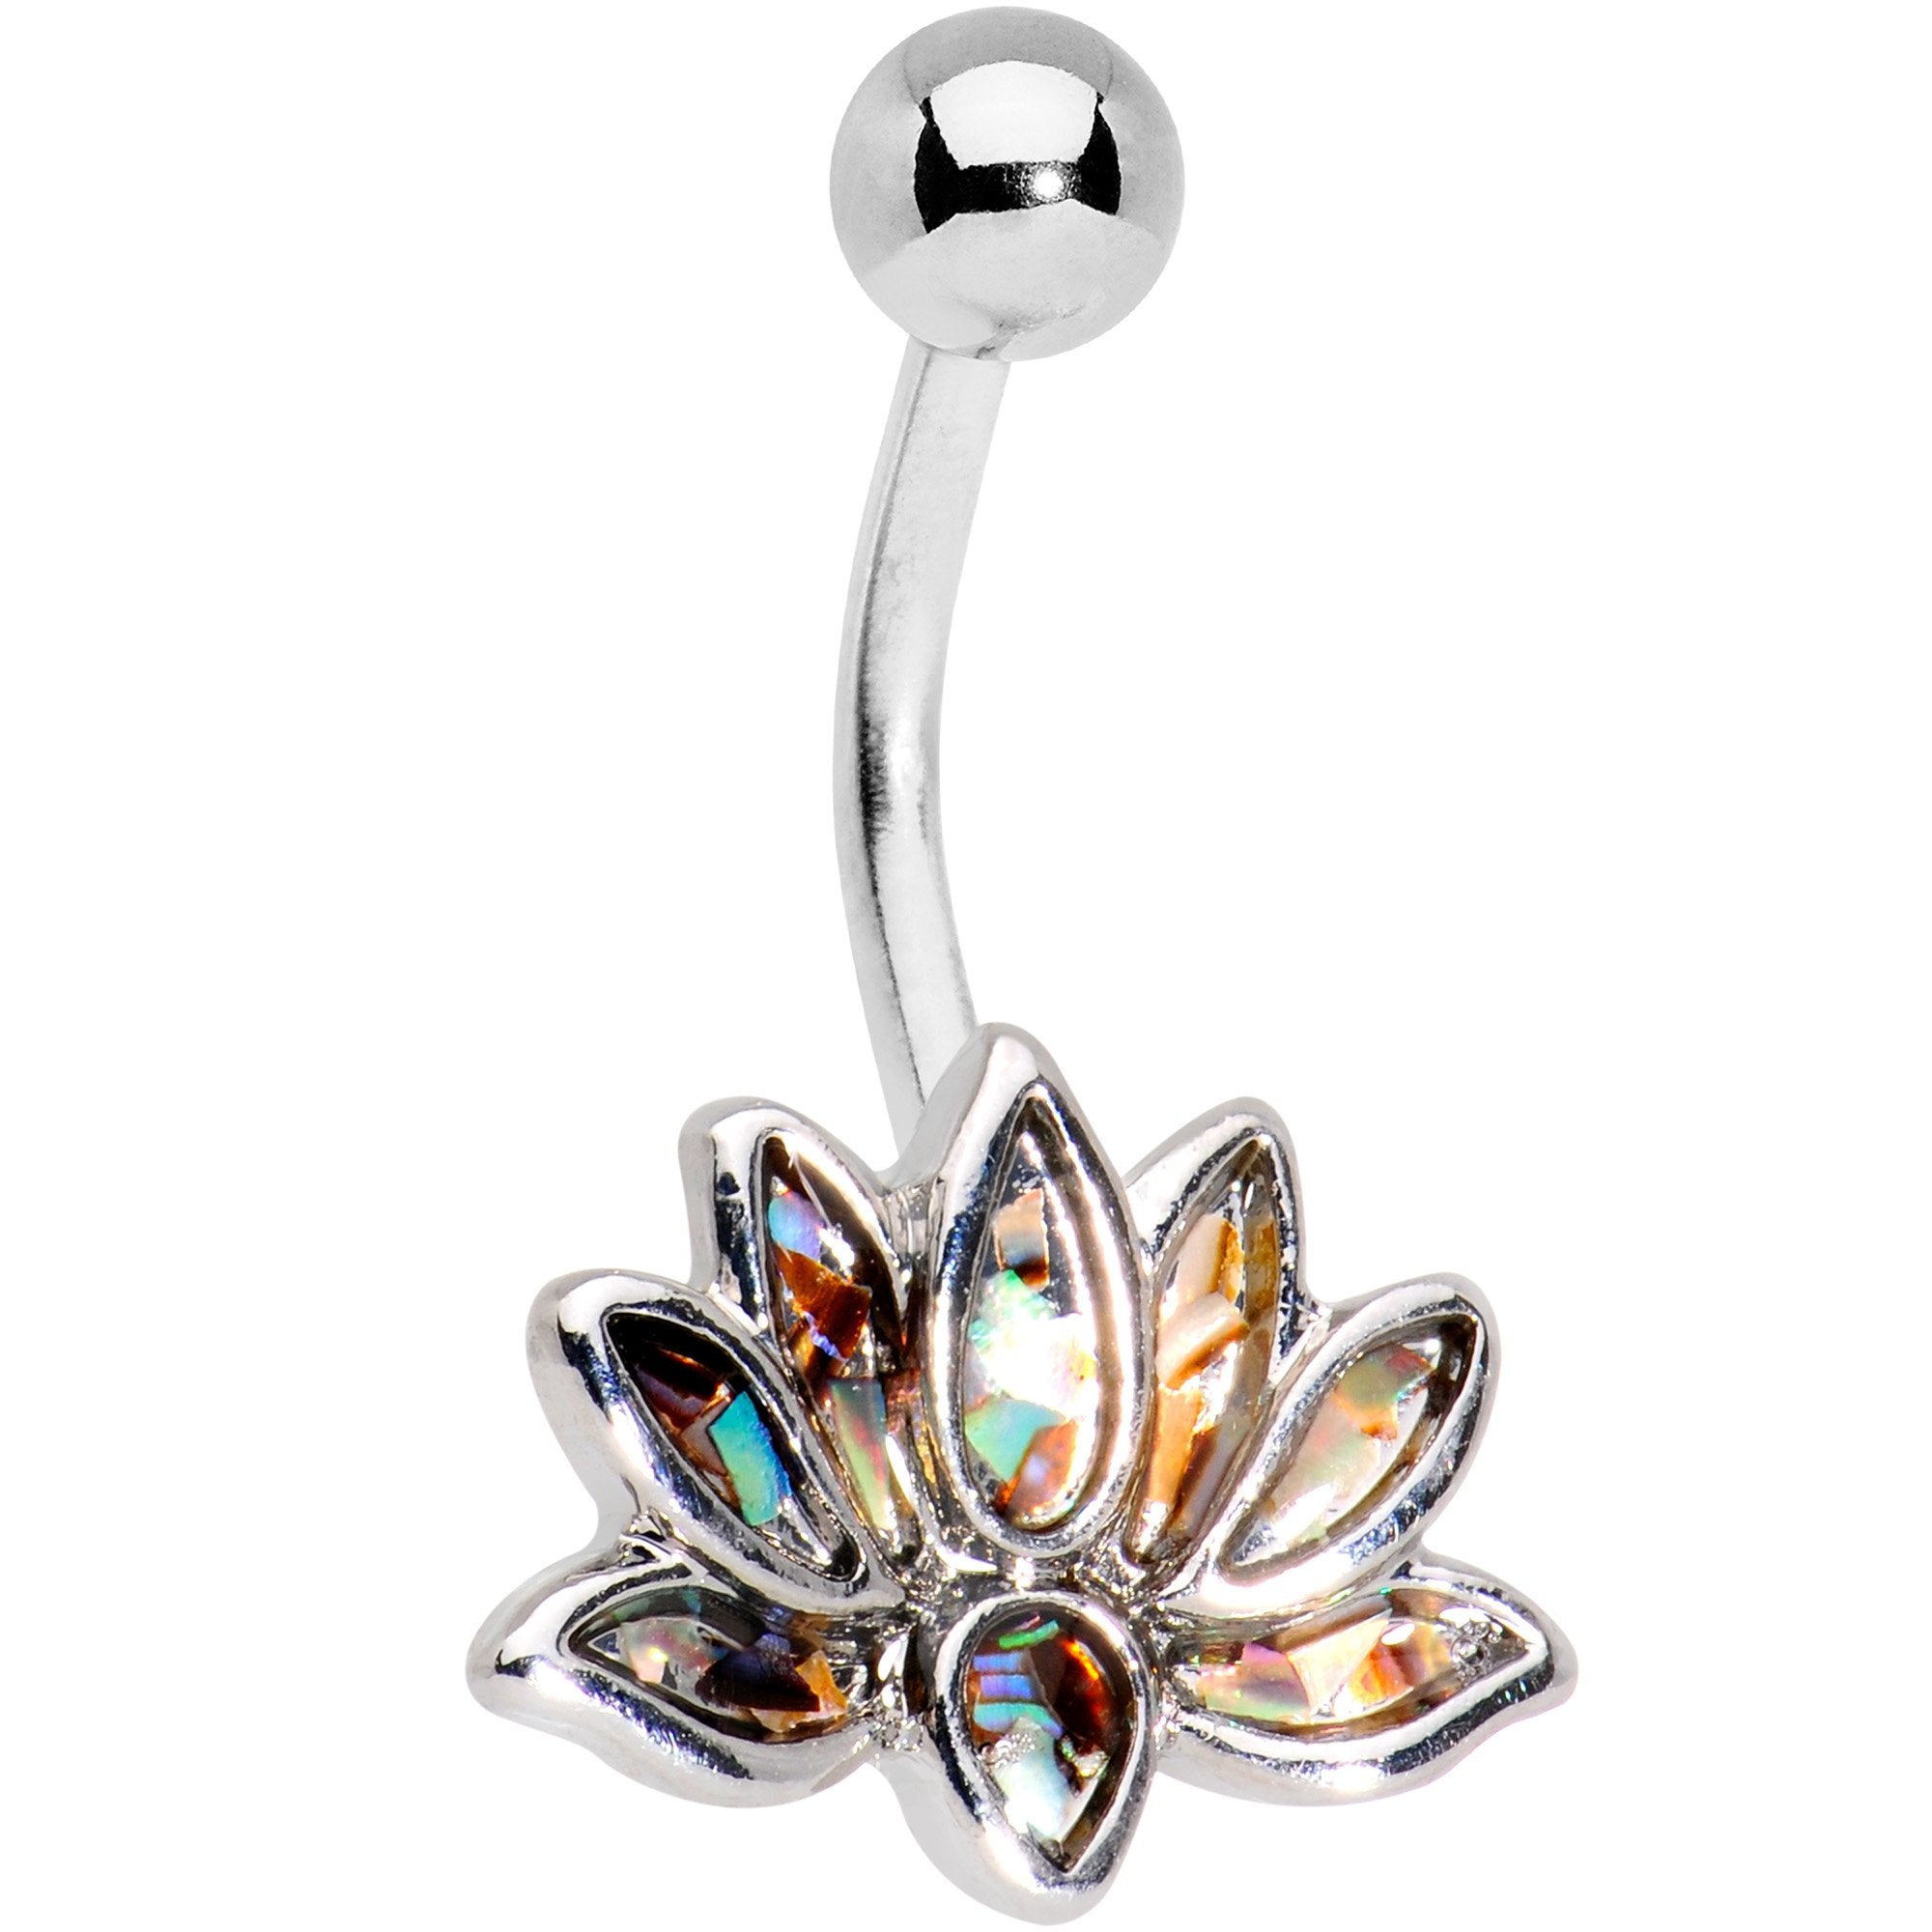 Iridescent Lotus Flower and Ancient Buddha Belly Ring Set of 2